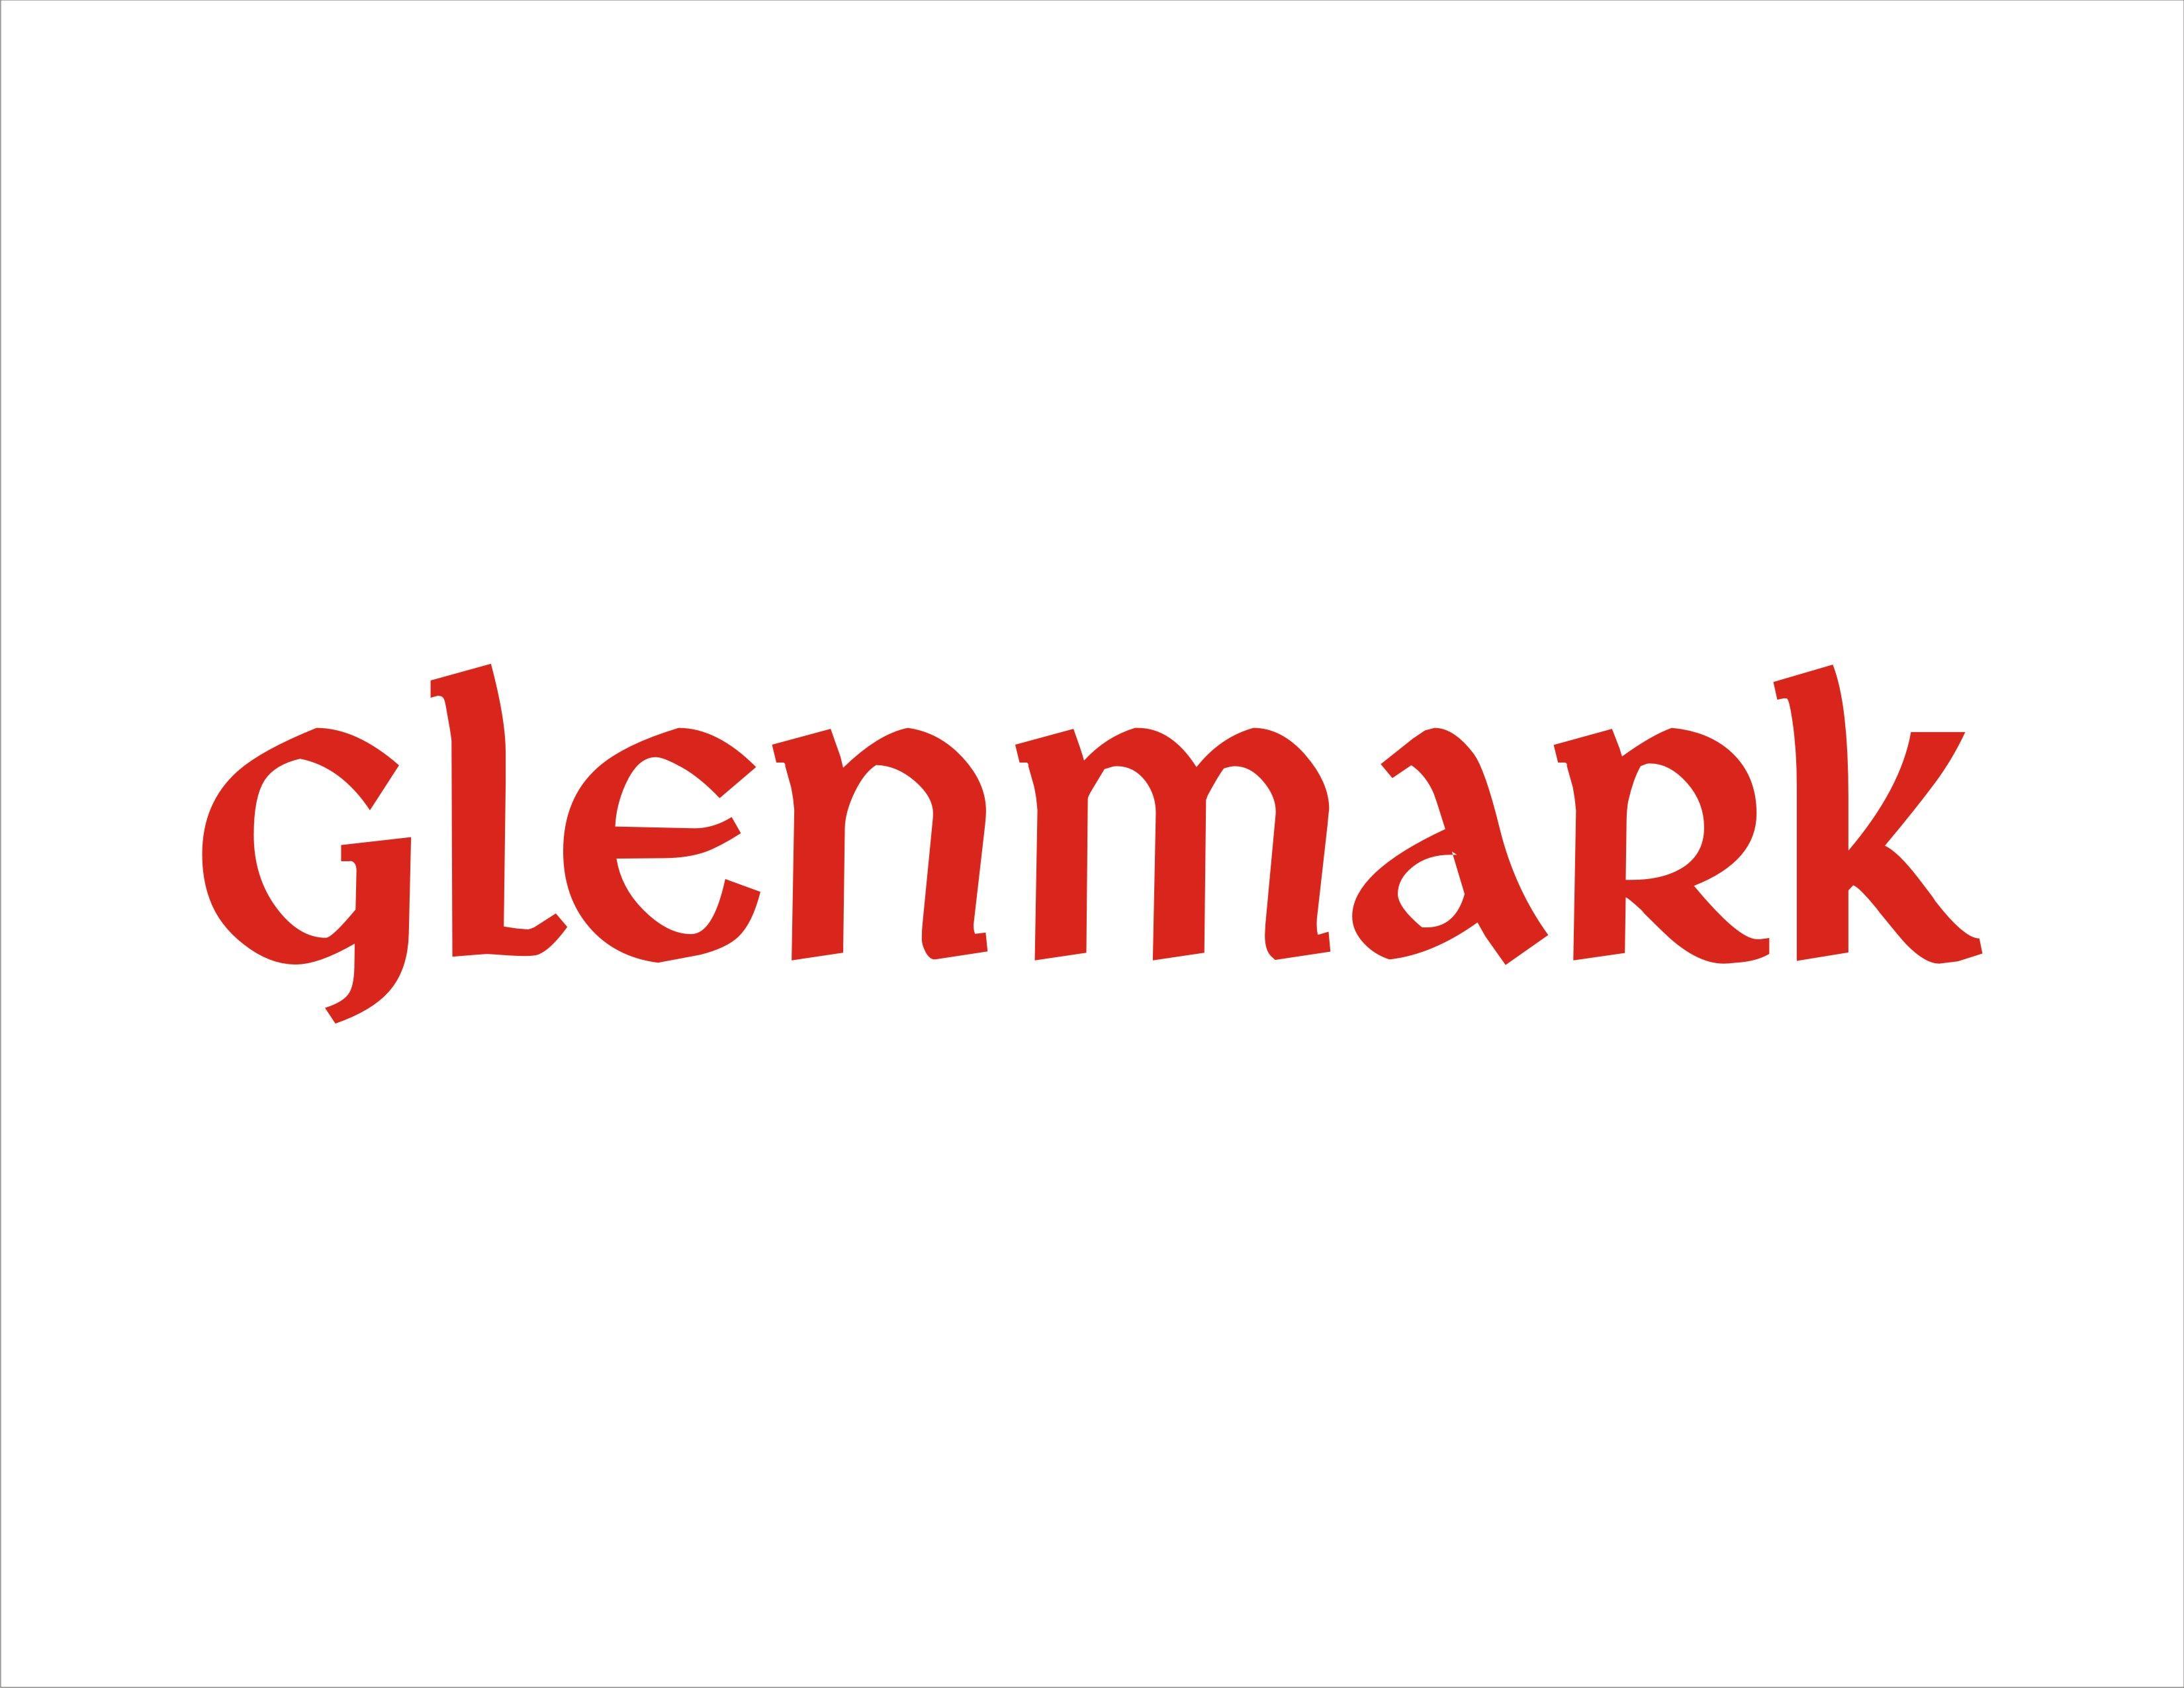 Glenmark inks pact with private equity firm True North